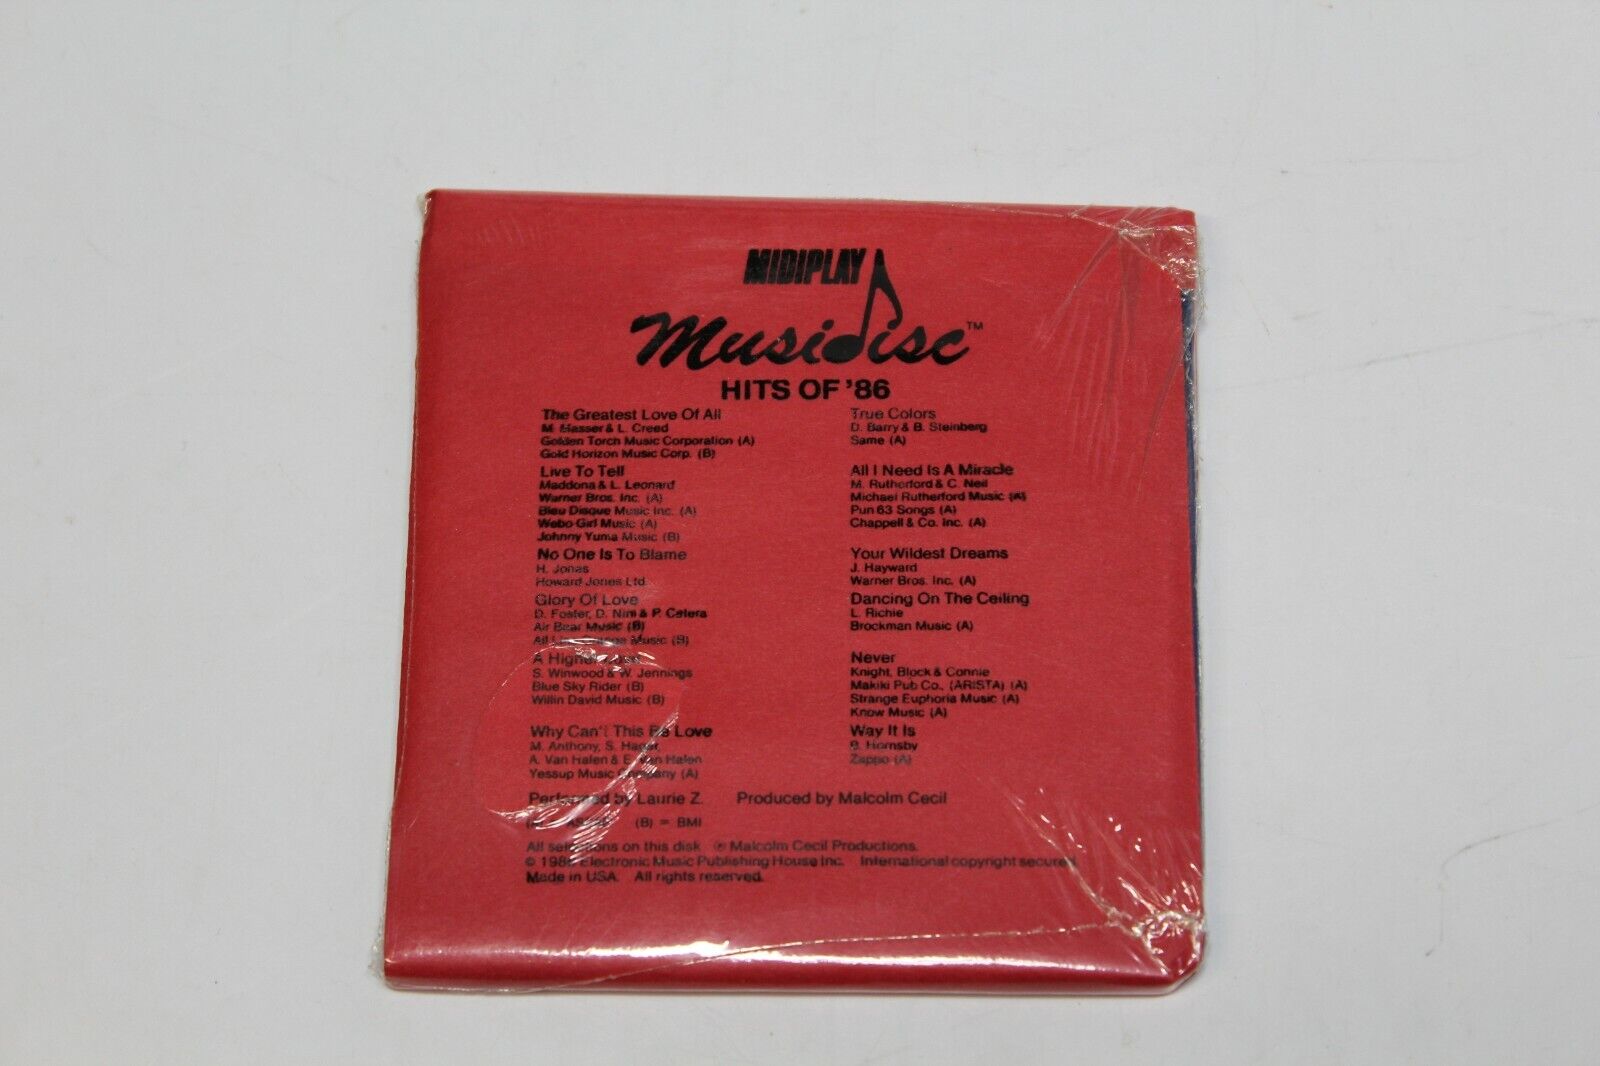 VTG MidiPlay MusicDisc Hits of '86 Vol 1 - 1986 - NEW - Factory Sealed